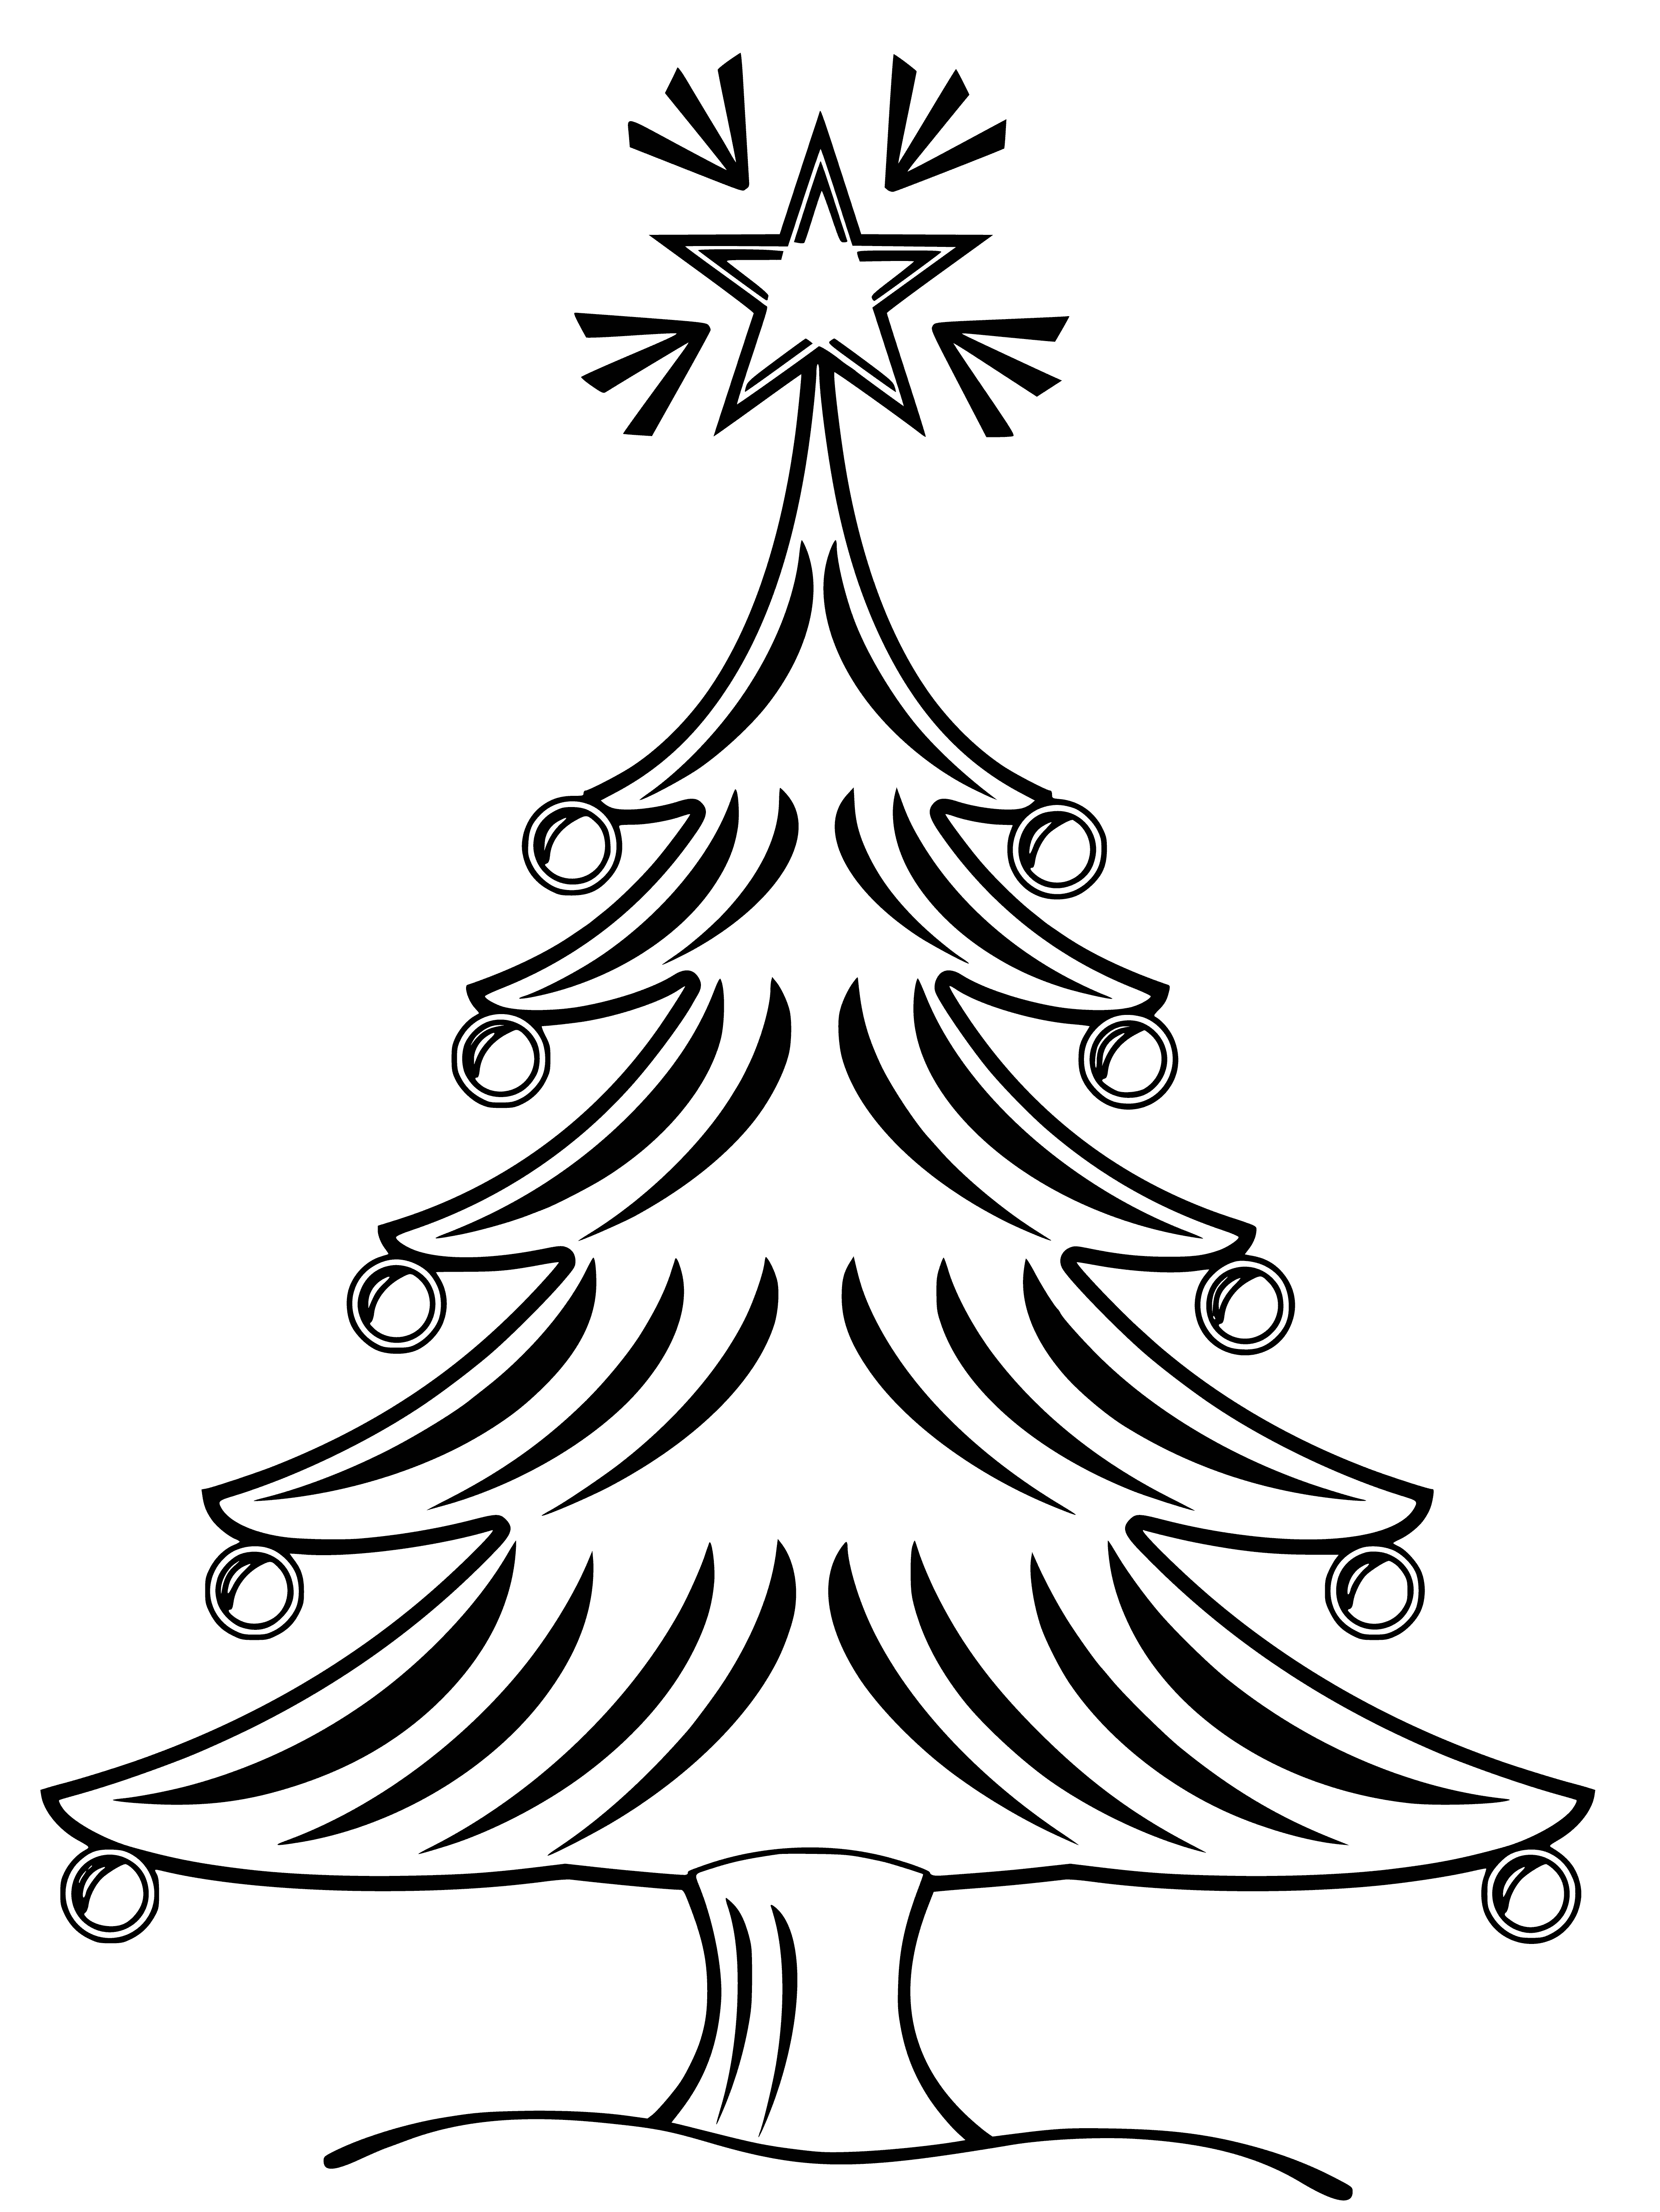 coloring page: Family gathering 'round the tree & fireplace, surrounded by presents. Dog peering out from behind a couch, gazing at tree. #ChristmasMagic